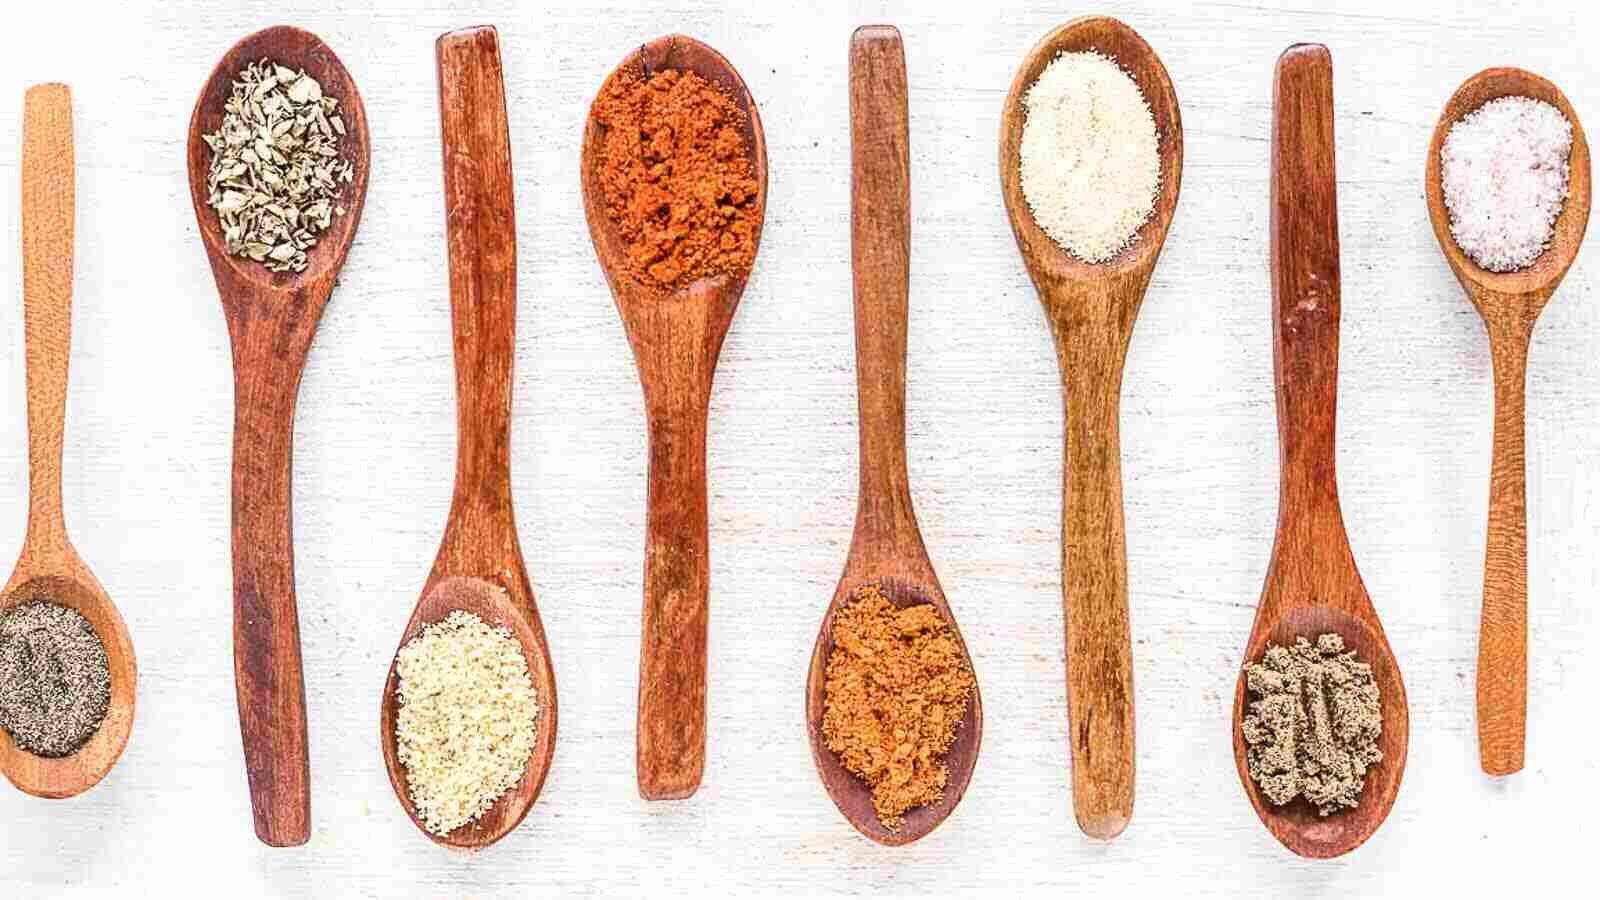 Spices in wooden spoons on a white background.